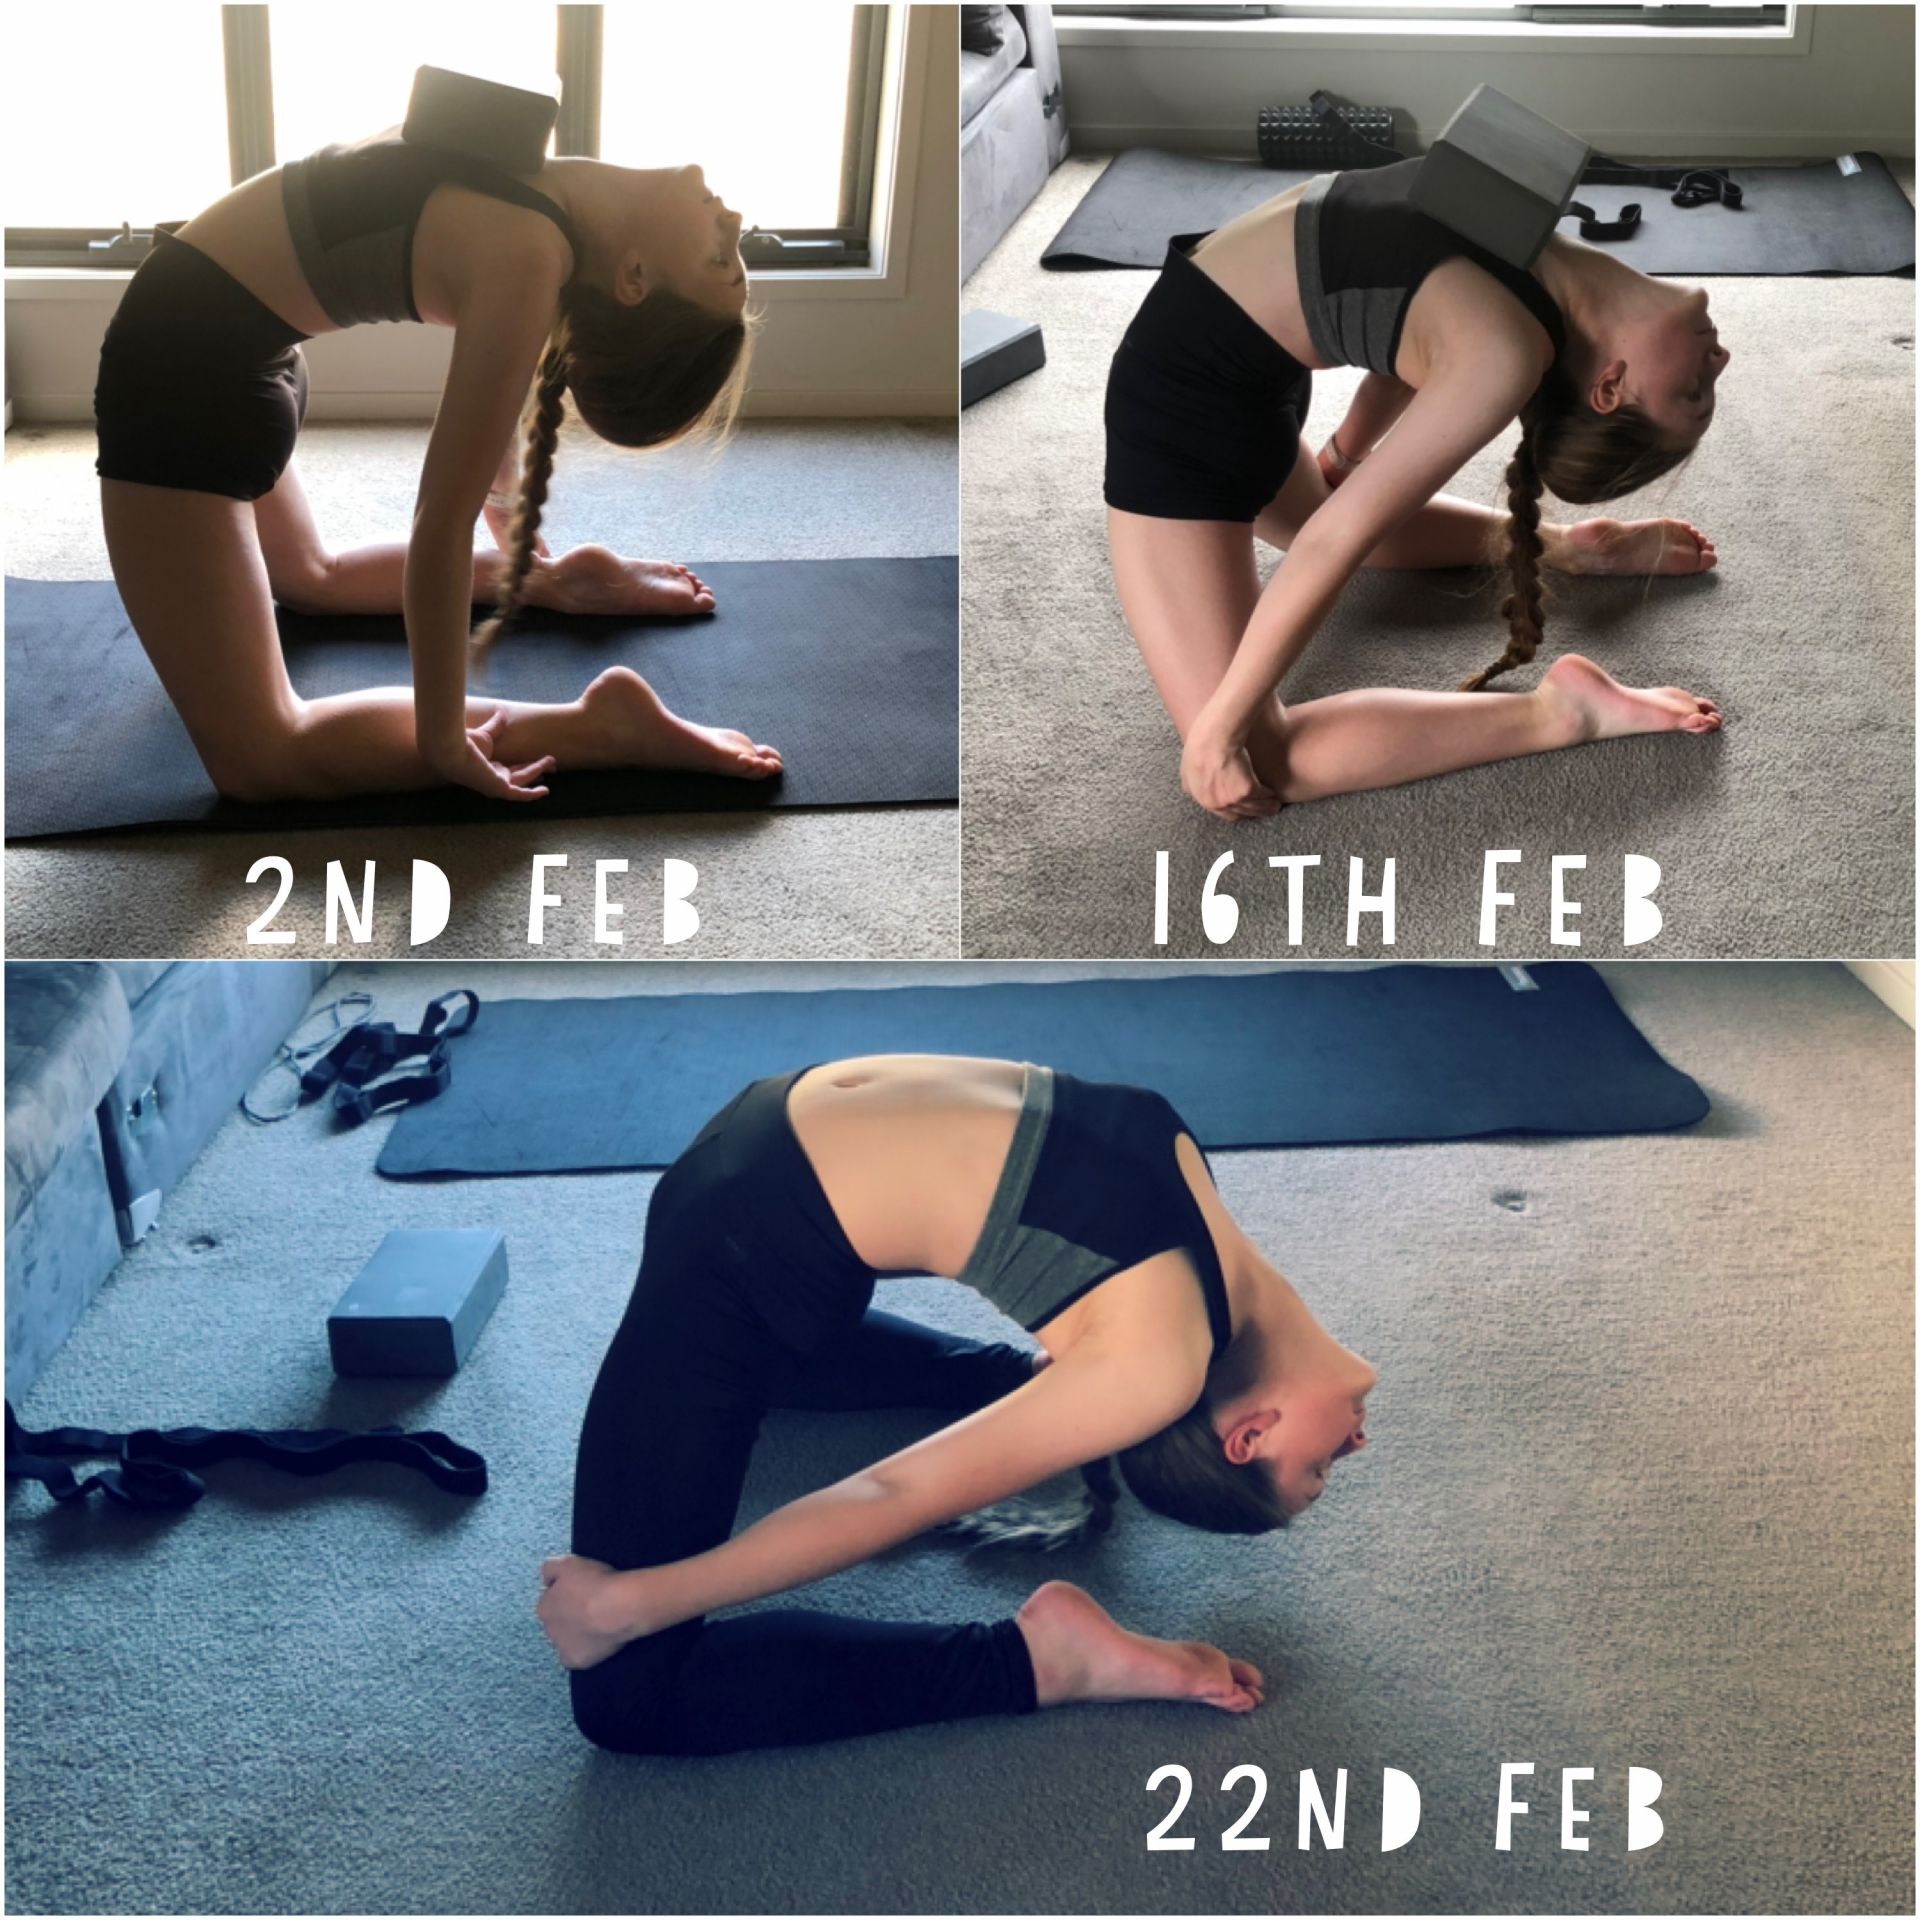 3 photos of back arcg progress after using Stacey's flexibility course